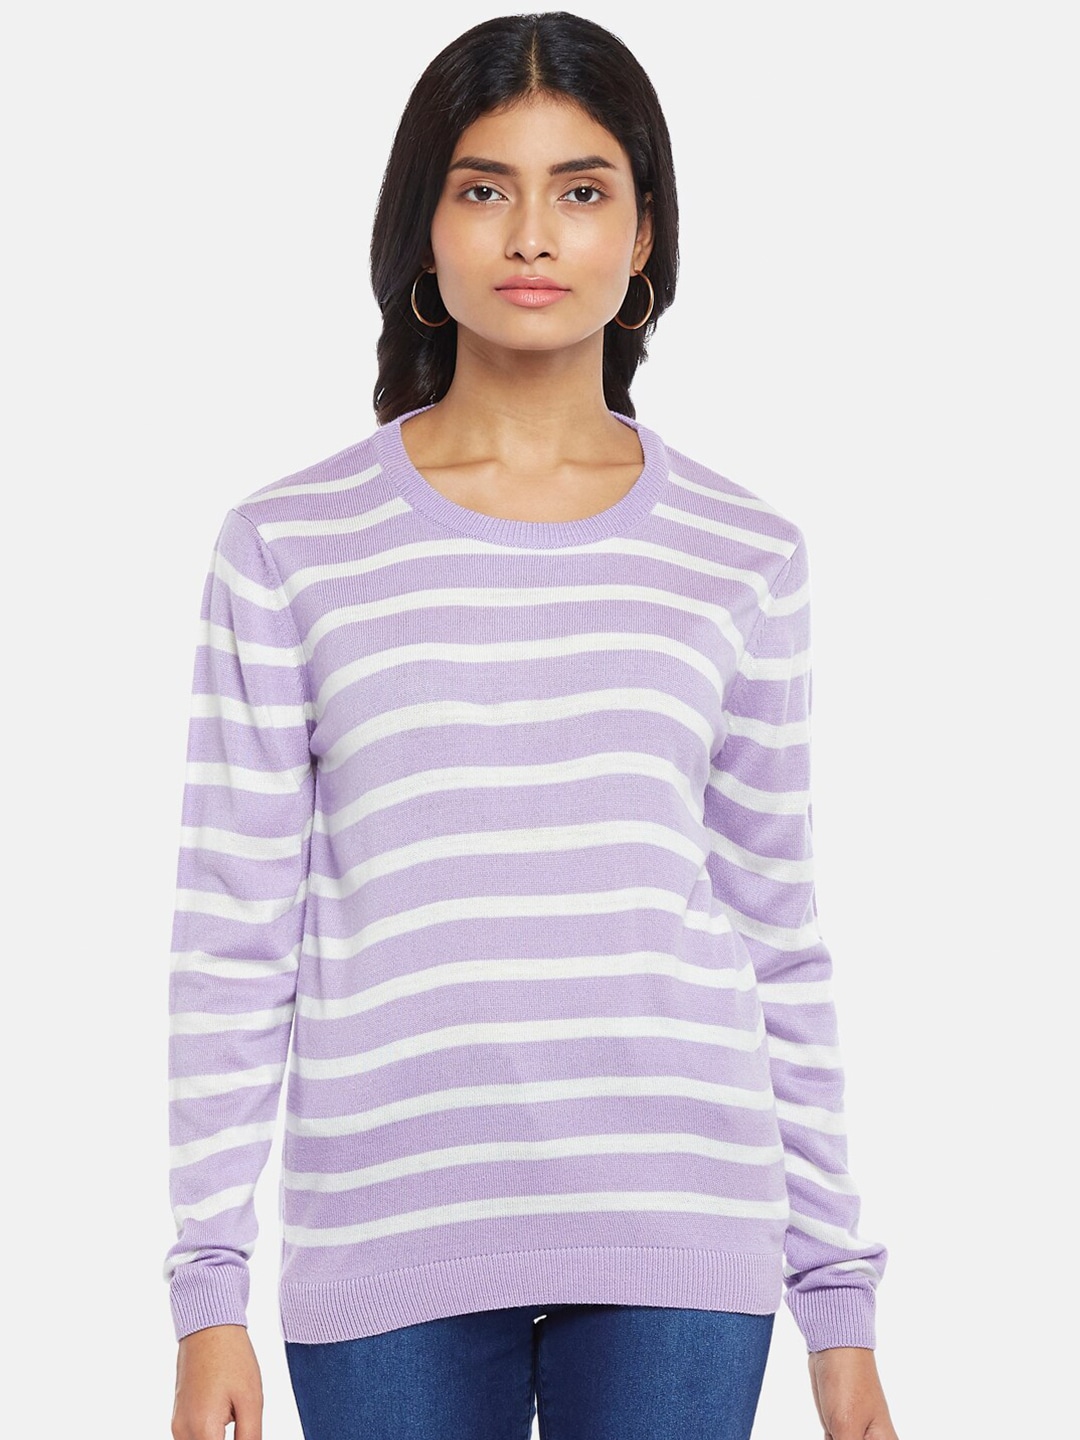 Honey by Pantaloons WOMEN Purple & White Striped Top Price in India